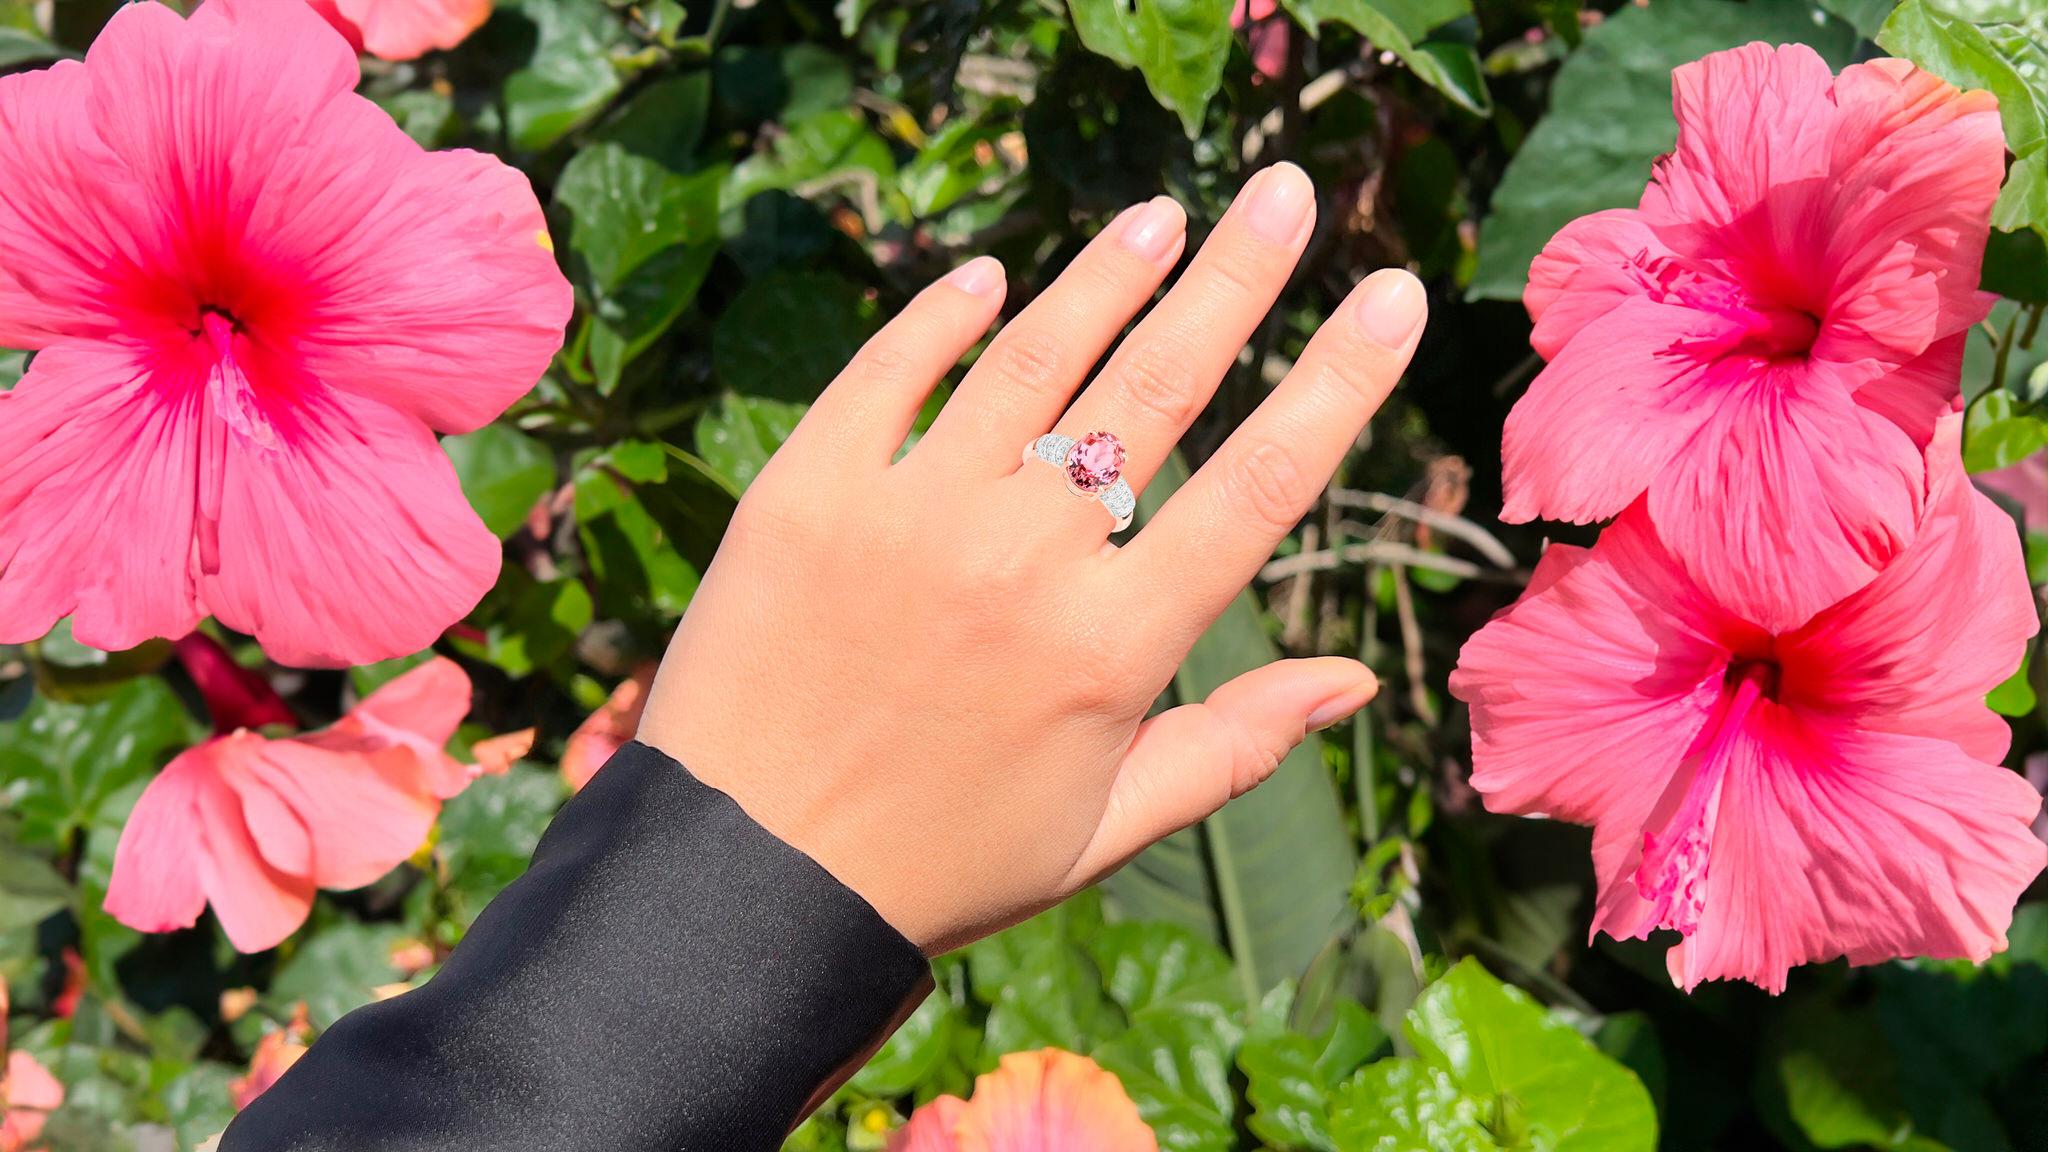 It comes with the Gemological Appraisal by GIA GG/AJP
All Gemstones are Natural
Pink Tourmaline = 2.90 Carat
Cut: Oval
Diamonds = 0.20 Carats
Metal: 14K Rose Gold
Ring Size: 7* US
*It can be resized complimentary
